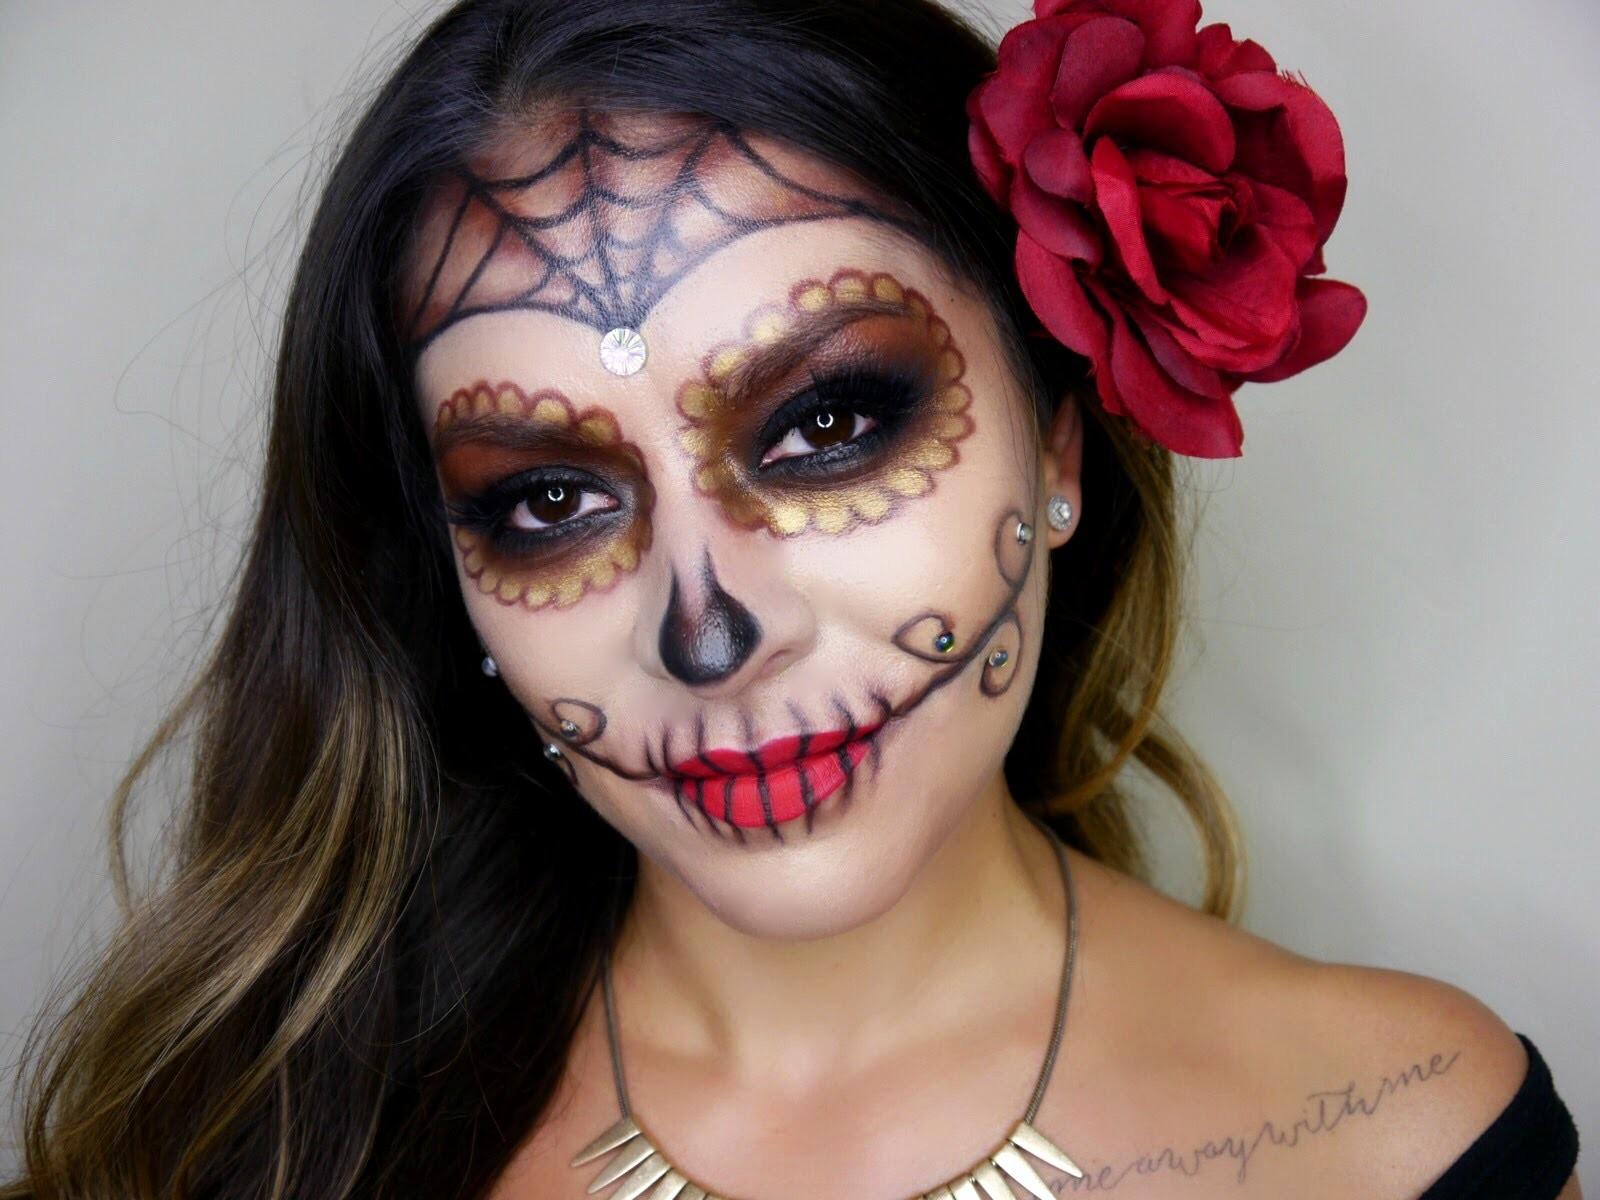 Girl with Face Painted for Dia de los Muertos Day